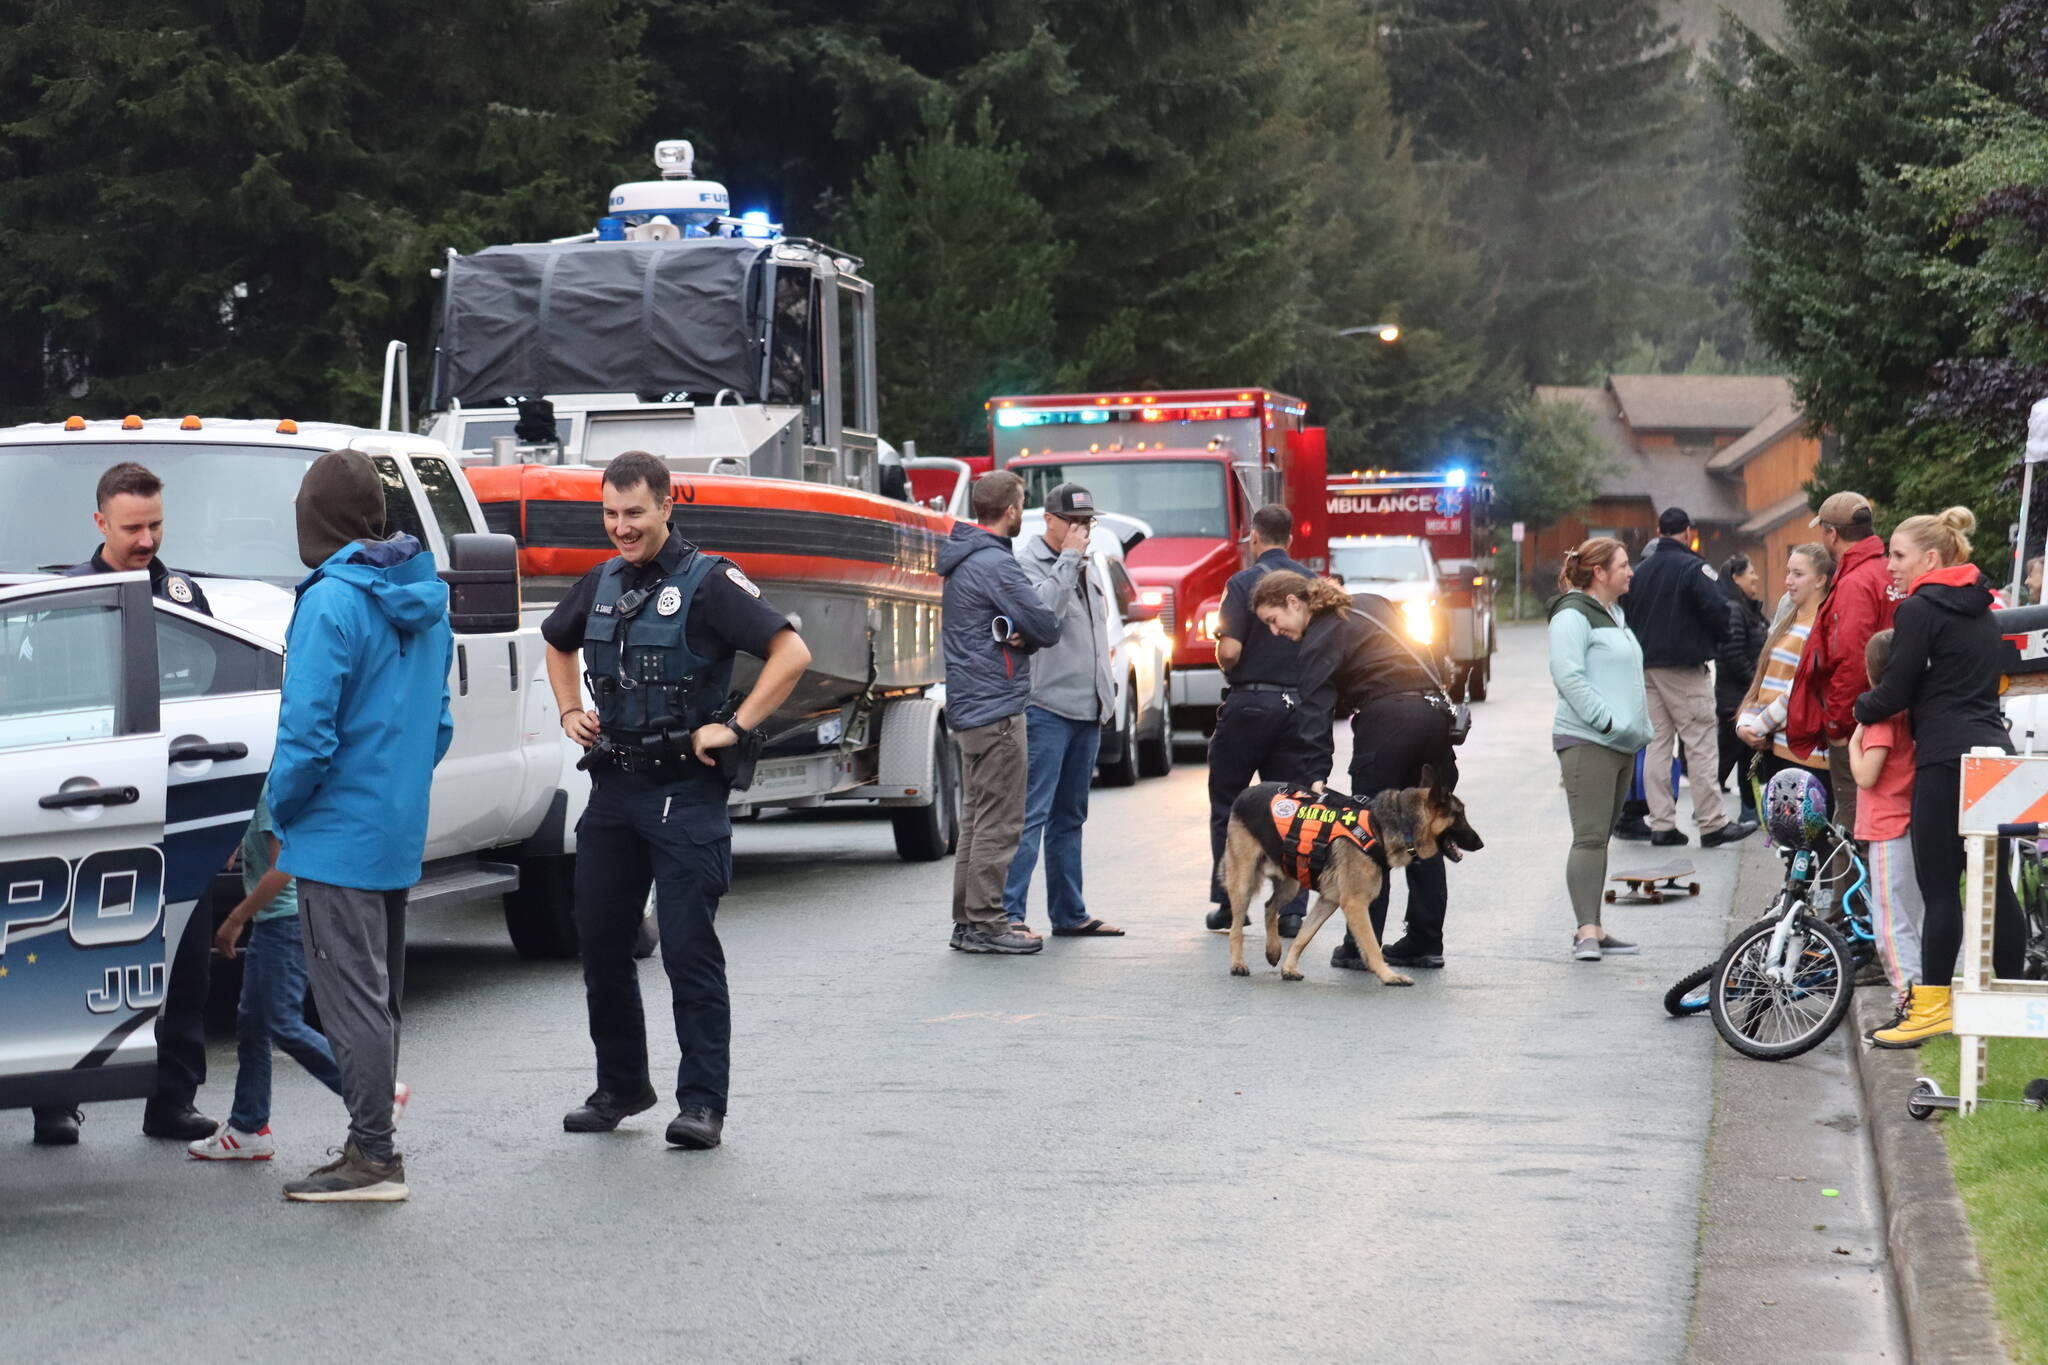 Plenty of community engagement to go around at Juneau’s 14th Annual National Night Out on Aug. 2 within several neighborhoods from around town. (Jonson Kuhn / Juneau Empire)